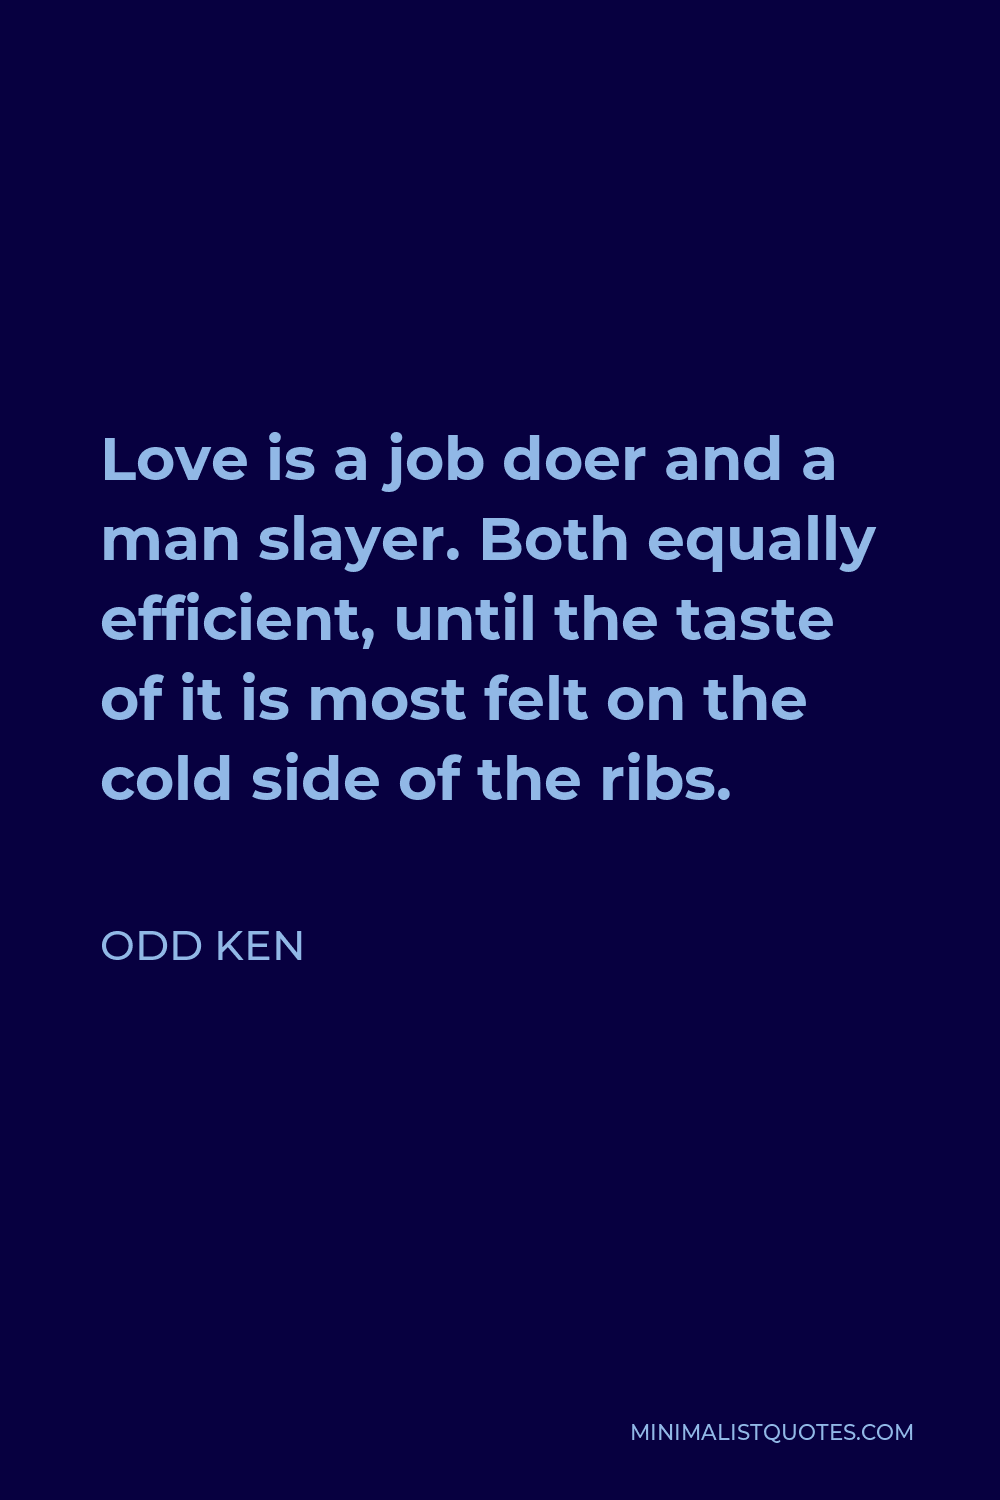 Odd Ken Quote - Love is a job doer and a man slayer. Both equally efficient, until the taste of it is most felt on the cold side of the ribs.